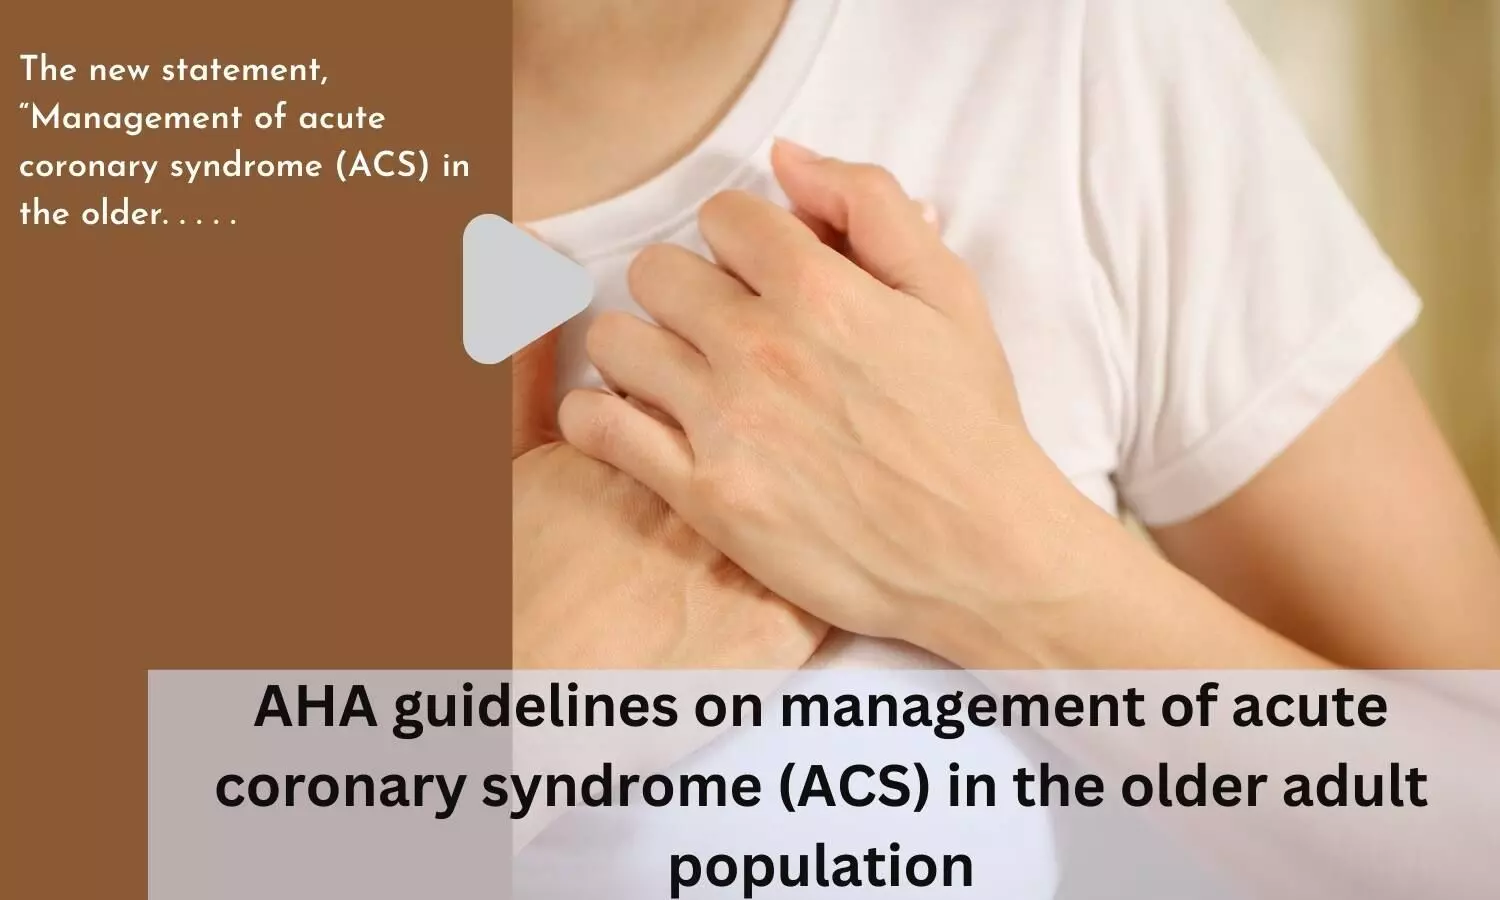 AHA guidelines on management of acute coronary syndrome (ACS) in the older adult population